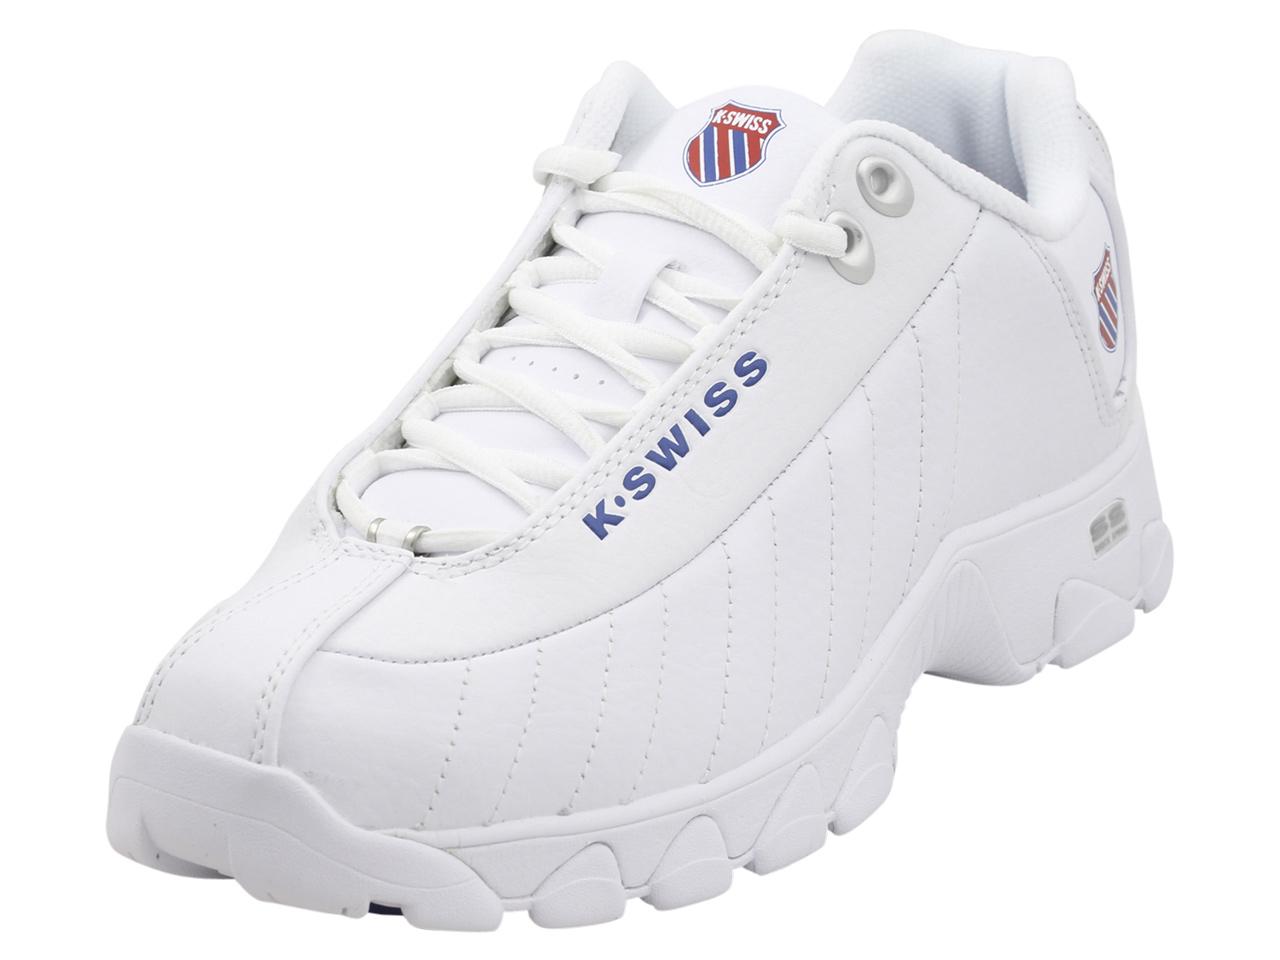 K Swiss Men's ST 329 Heritage Sneakers Shoes - White/Classic Blue/Ribbon Red - 11.5 D(M) US -  K-Swiss